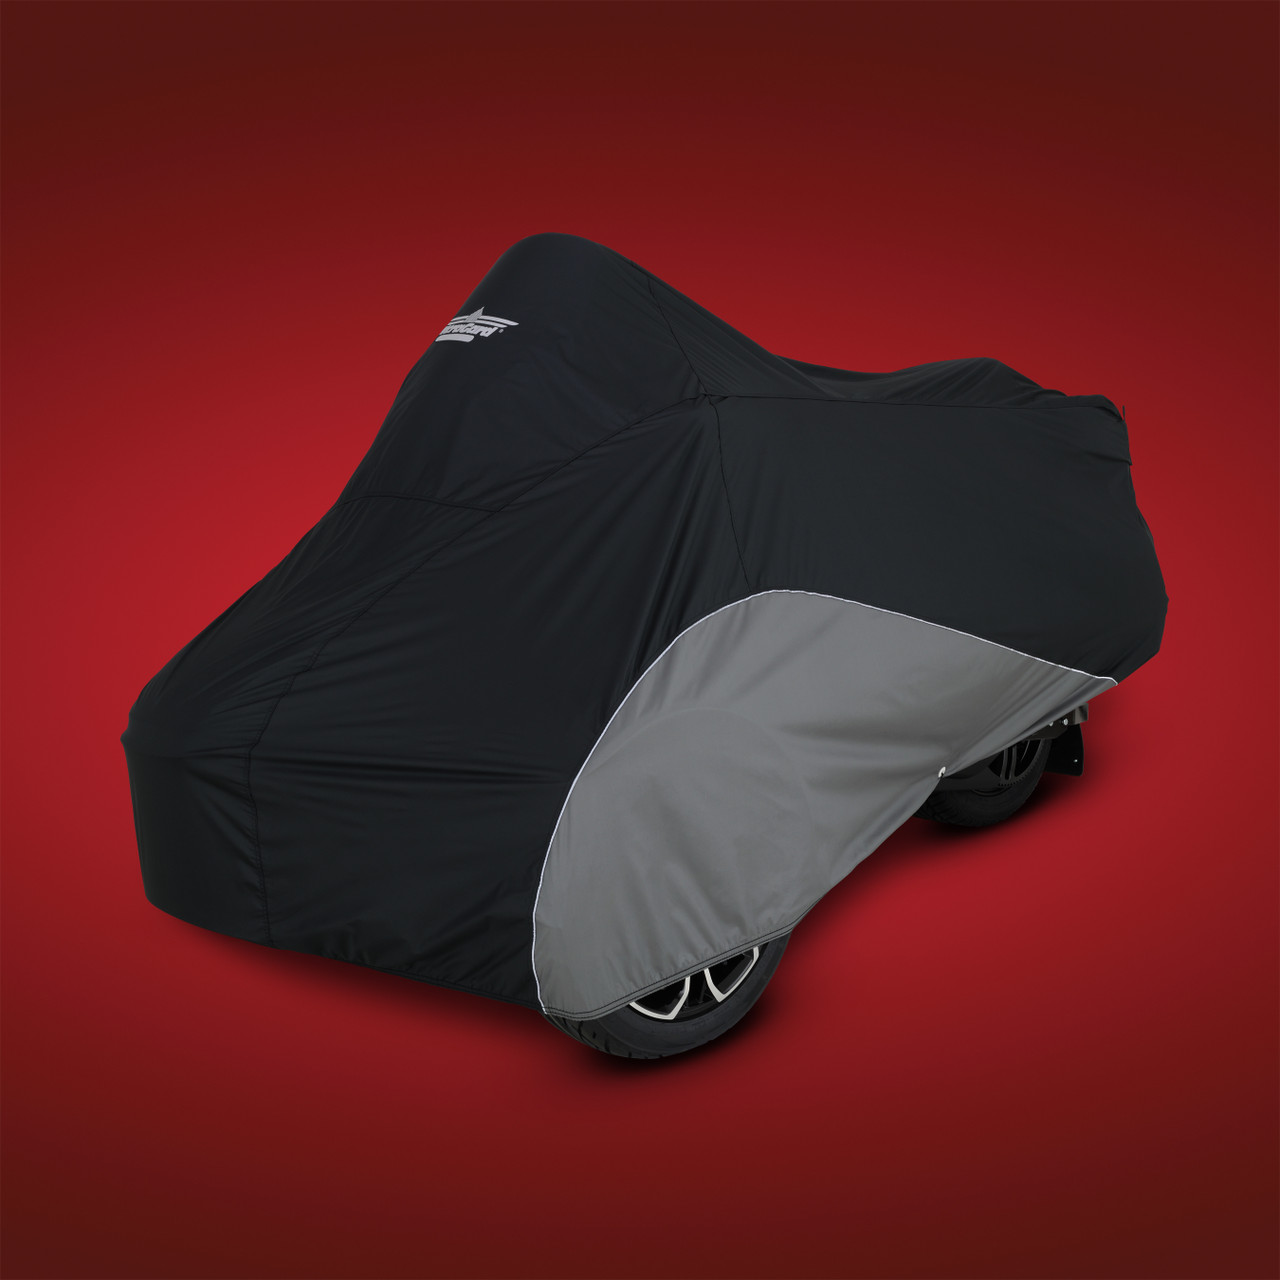 Ultragard New Can-Am Rt Cover 2020, 4-473BC